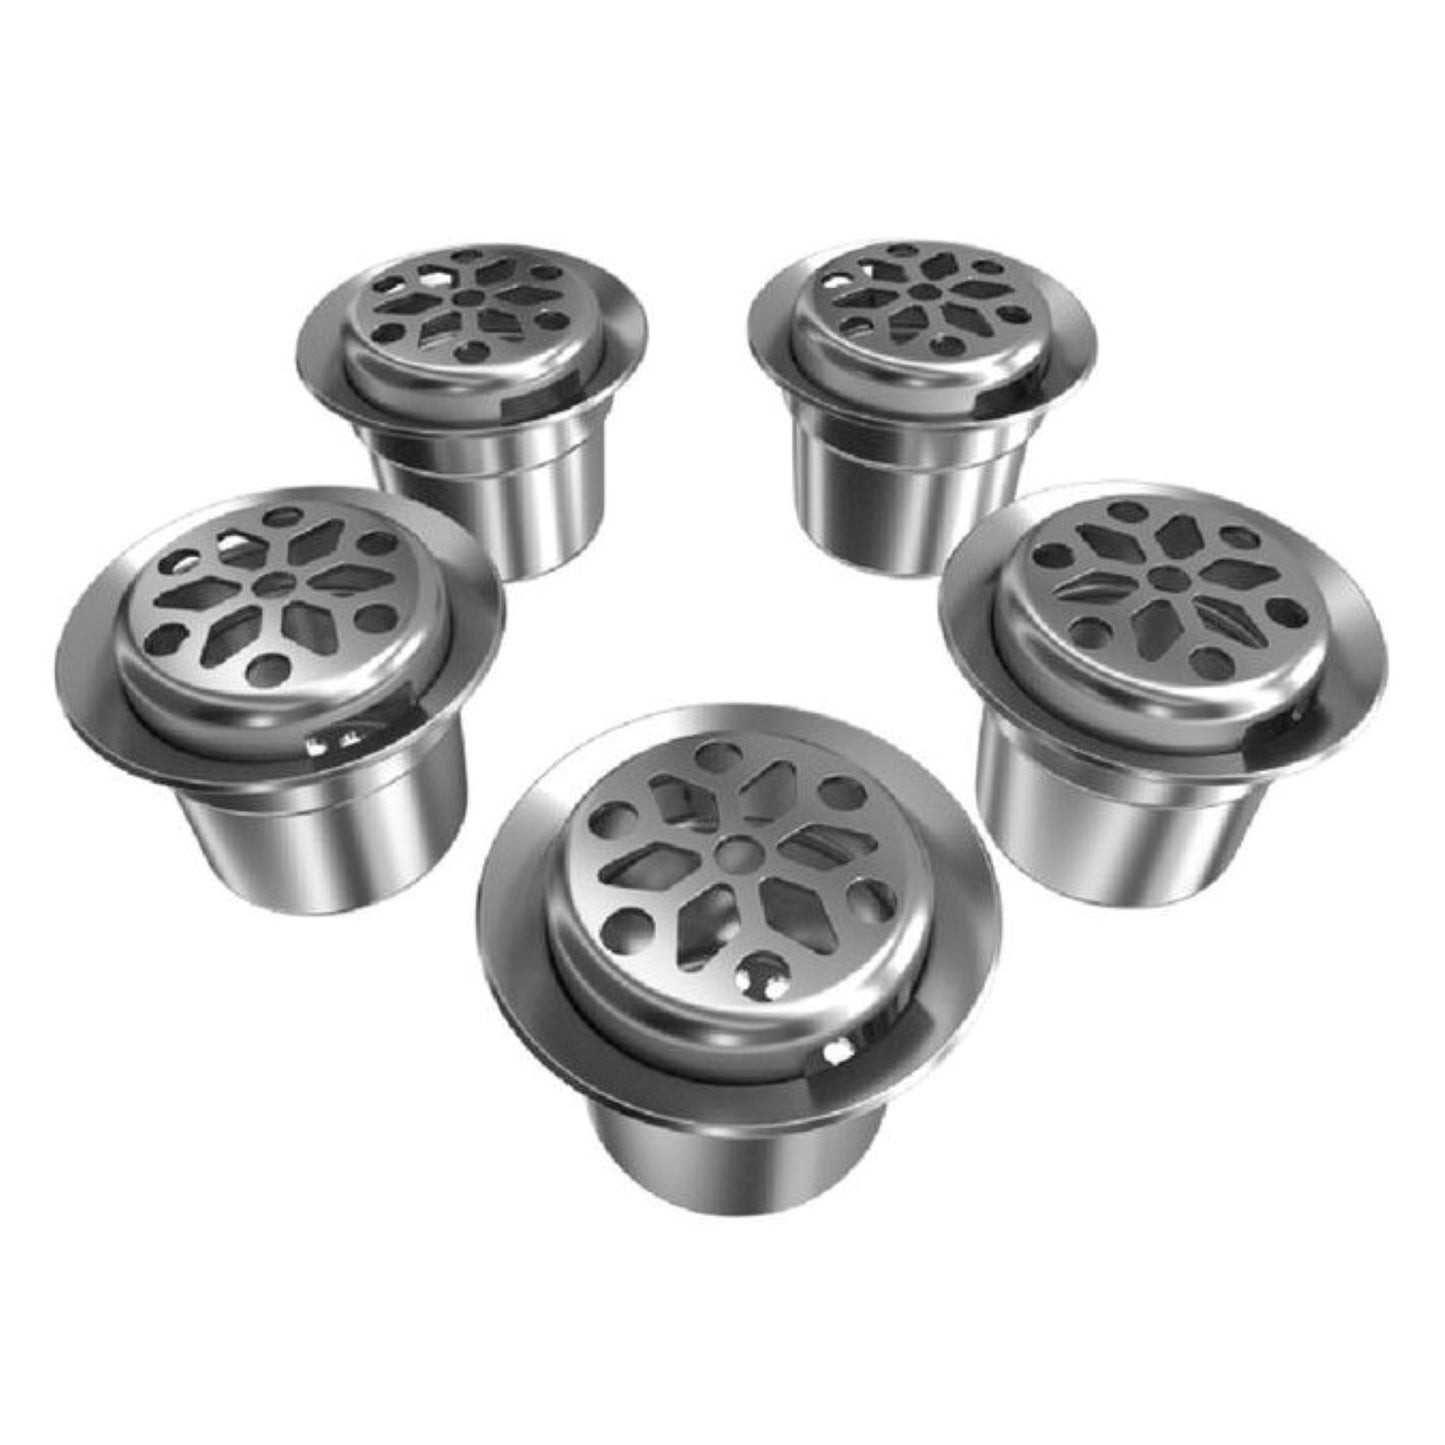 Weedgets Steel Pods - Fits Maze & Slider Pipes (5-Pack) by Weedgets | Mission Dispensary